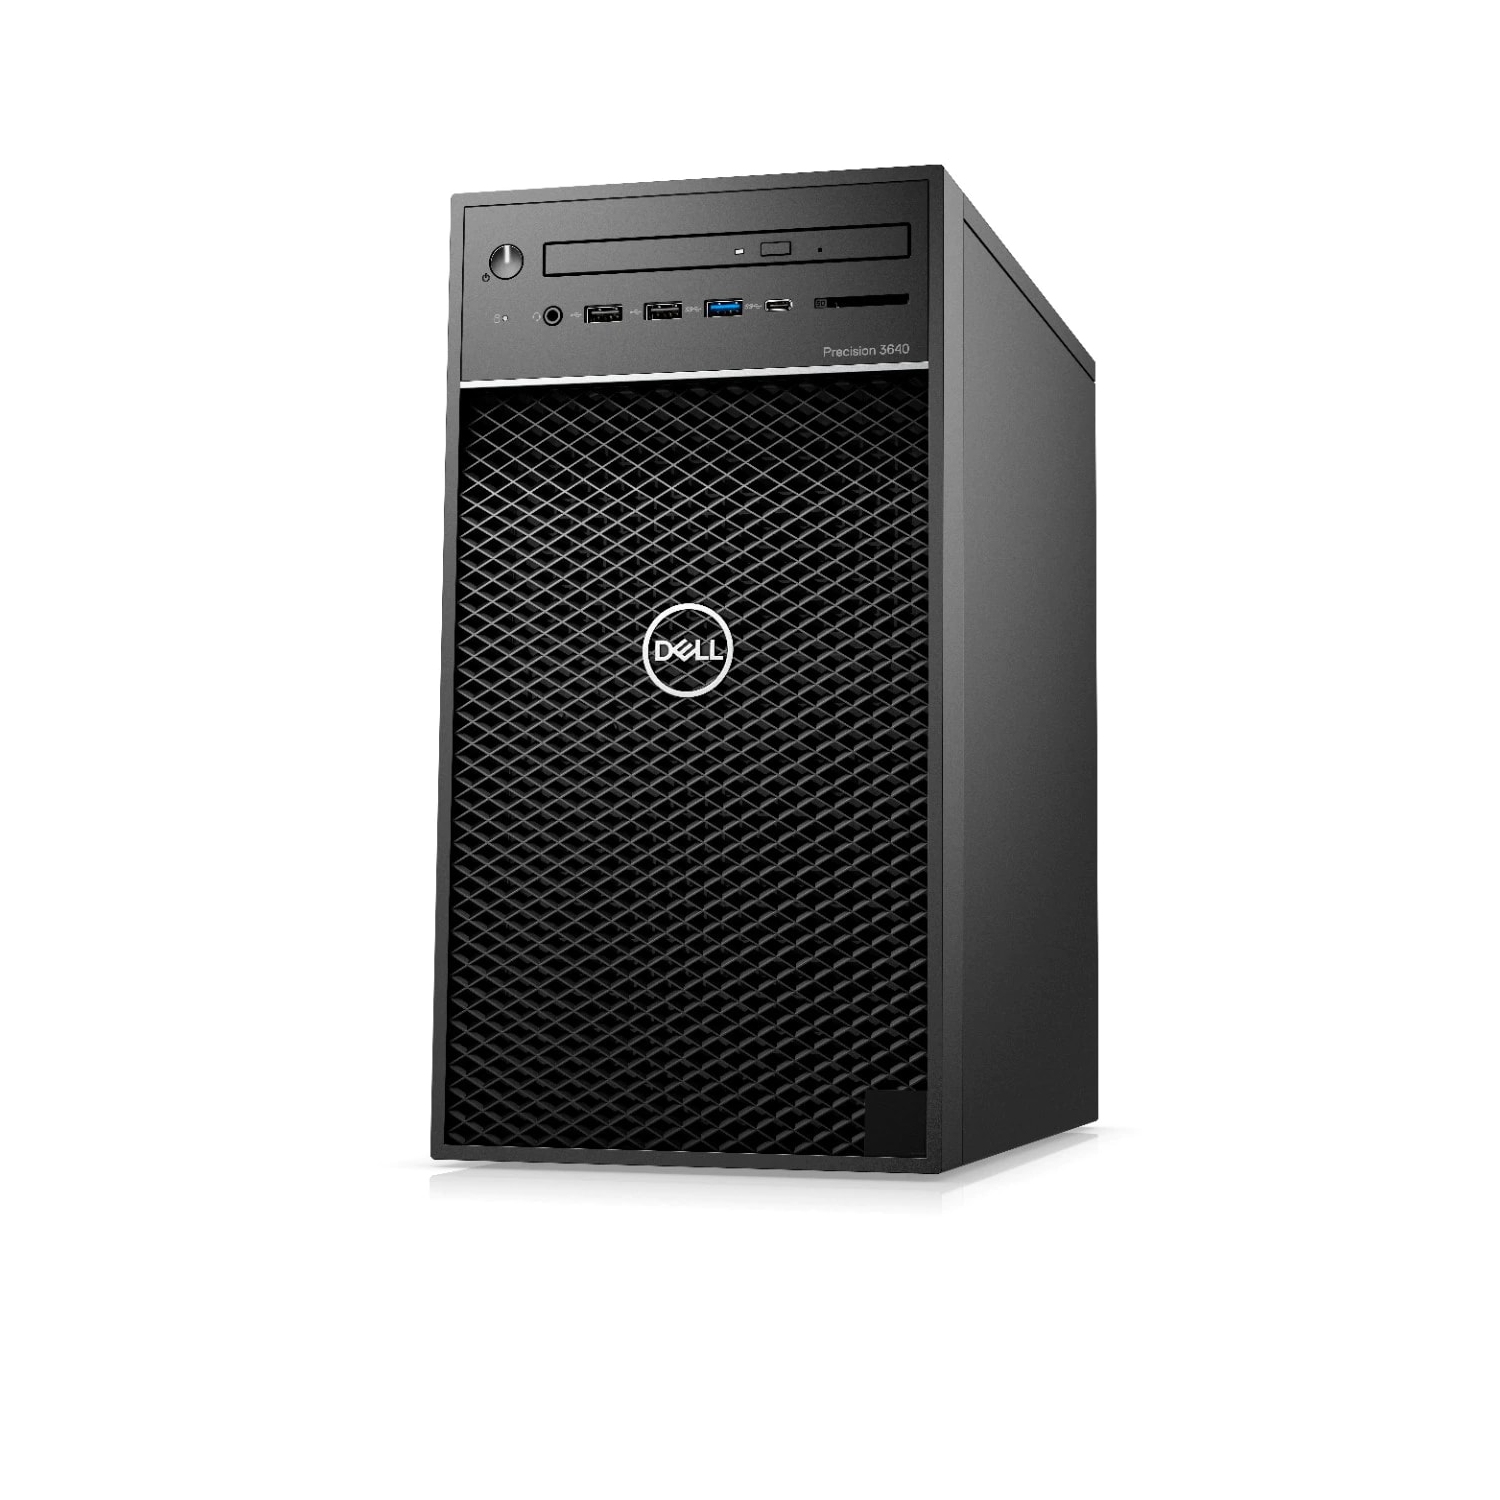 Refurbished (Excellent) - Dell Precision T3640 Workstation Desktop (2018), Core i7 - 1TB SSD - 32GB RAM - RTX 4000, 8 Cores @ 4.8 GHz - 10th Gen CPU Certified Refurbished